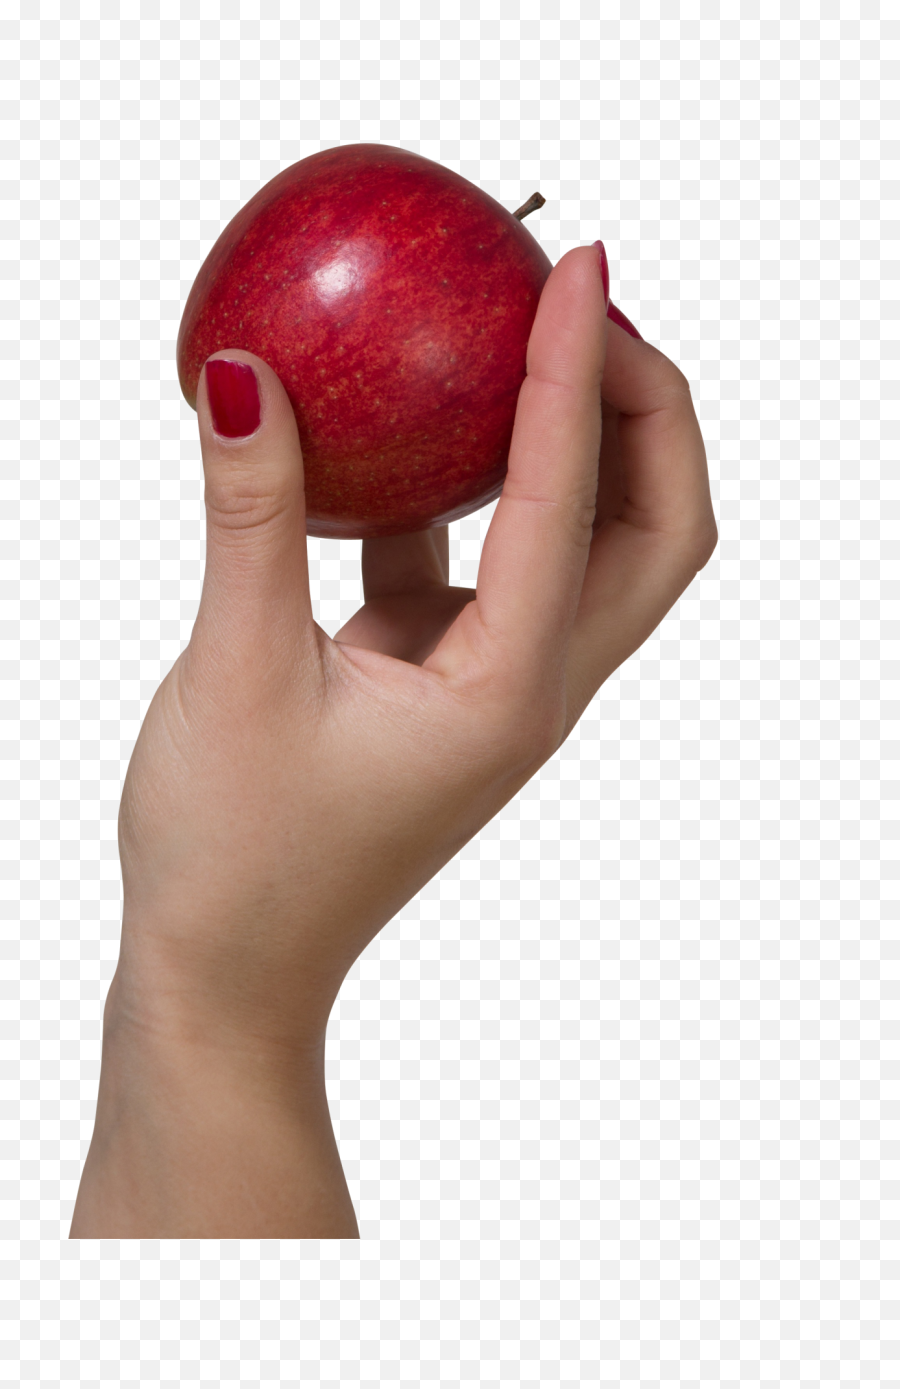 Download Holding An Apple - Hand Hold An Apple Hd Png Apple In Hand Png,Hand Holding Phone Png